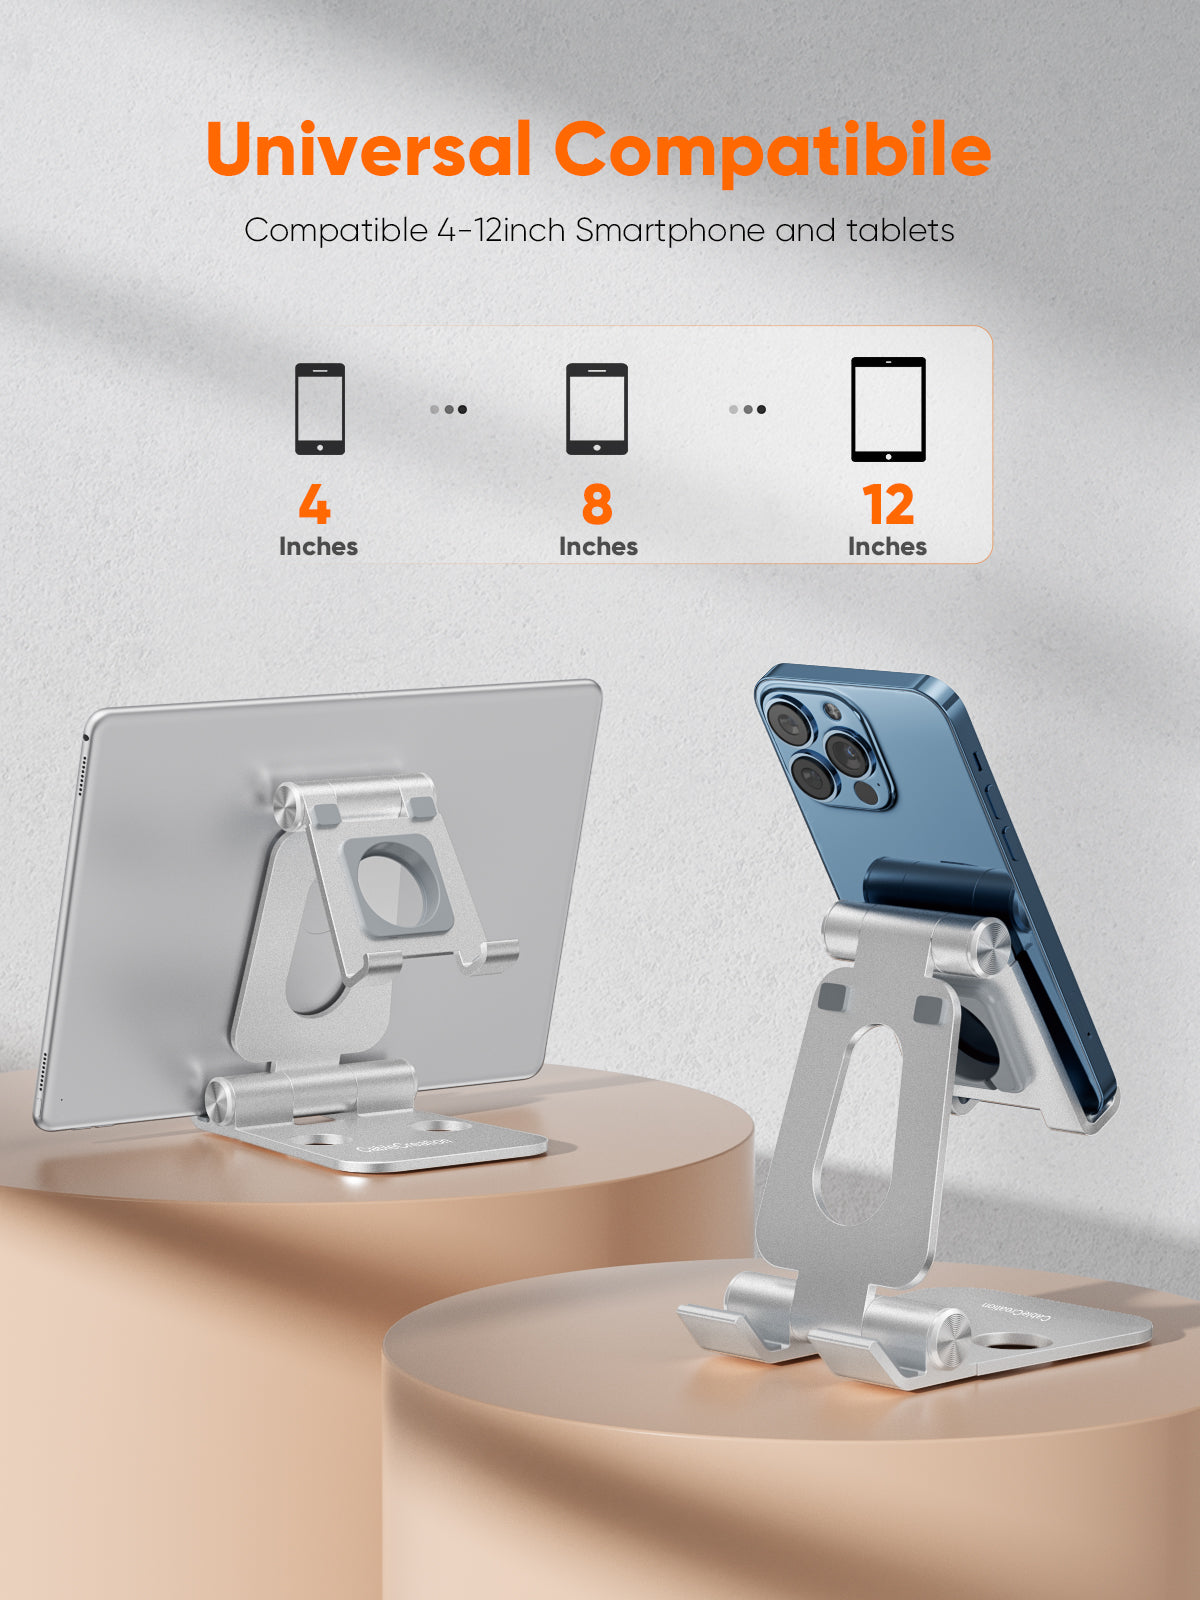 desk stand compatibile with 4-12 inch phone and tablets